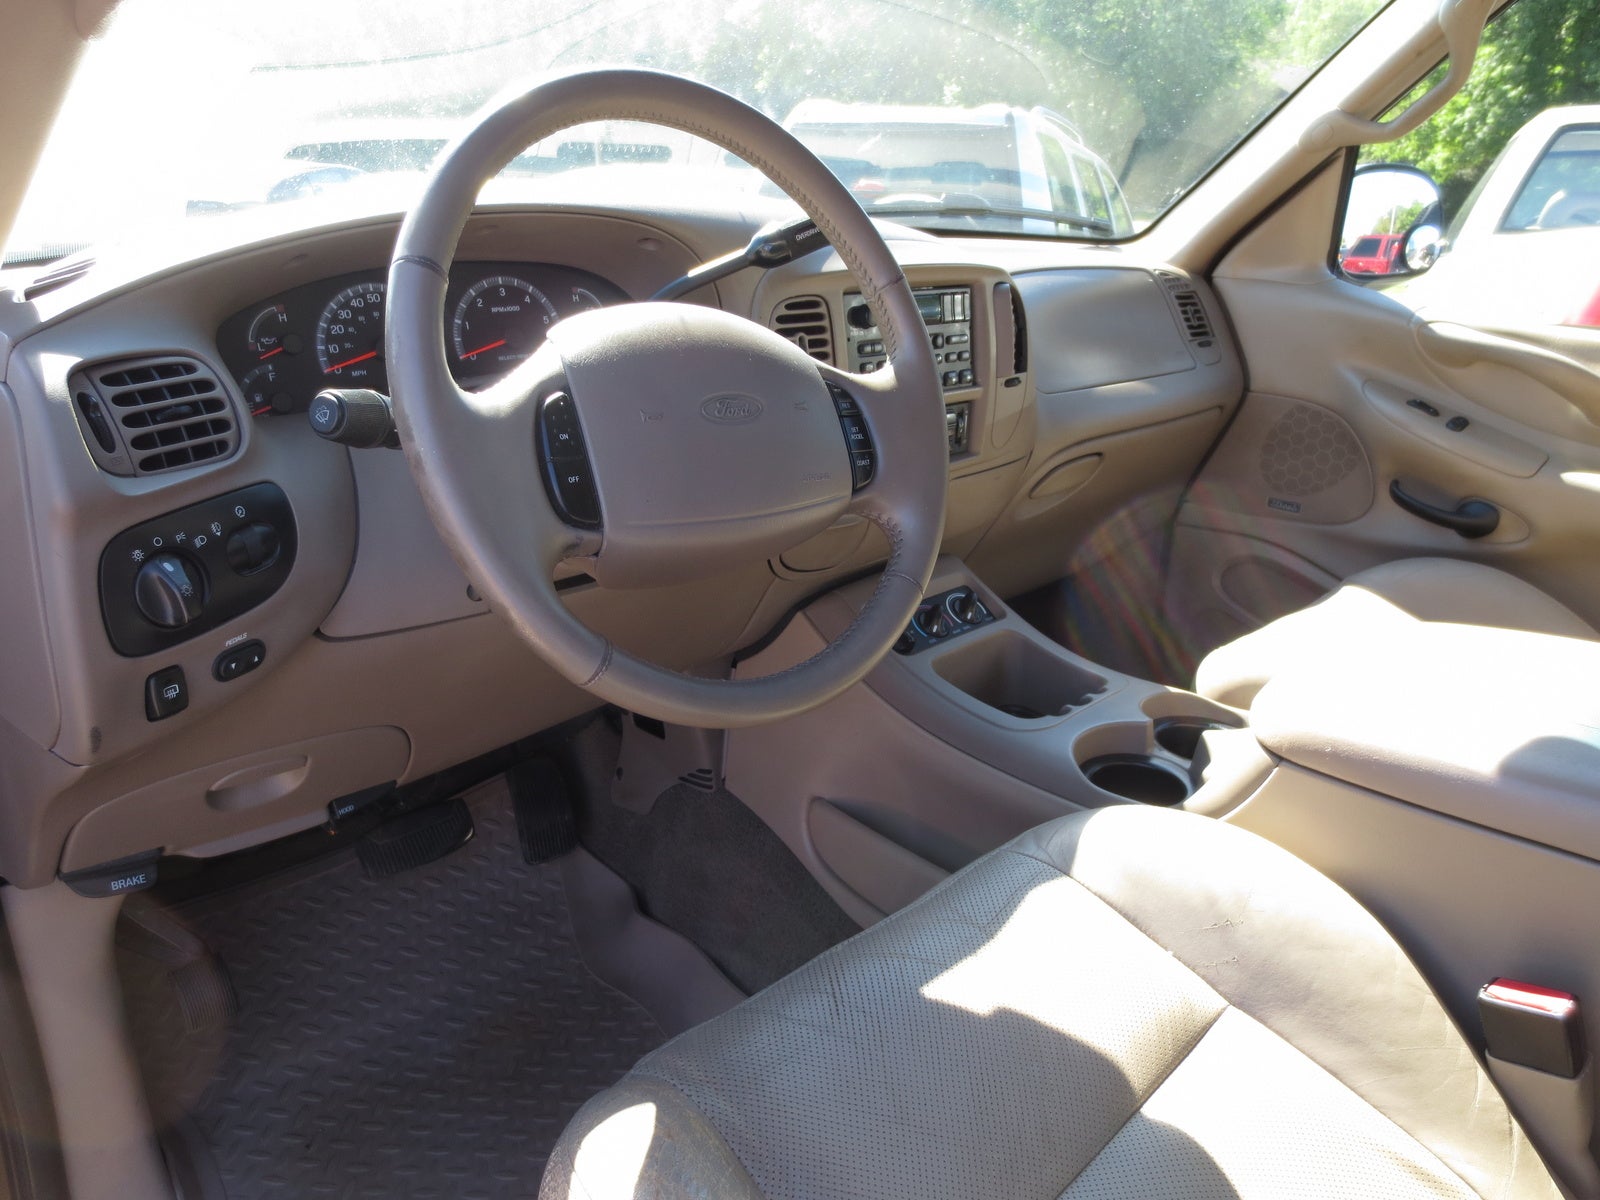 2001 Ford expedition interior pictures #9